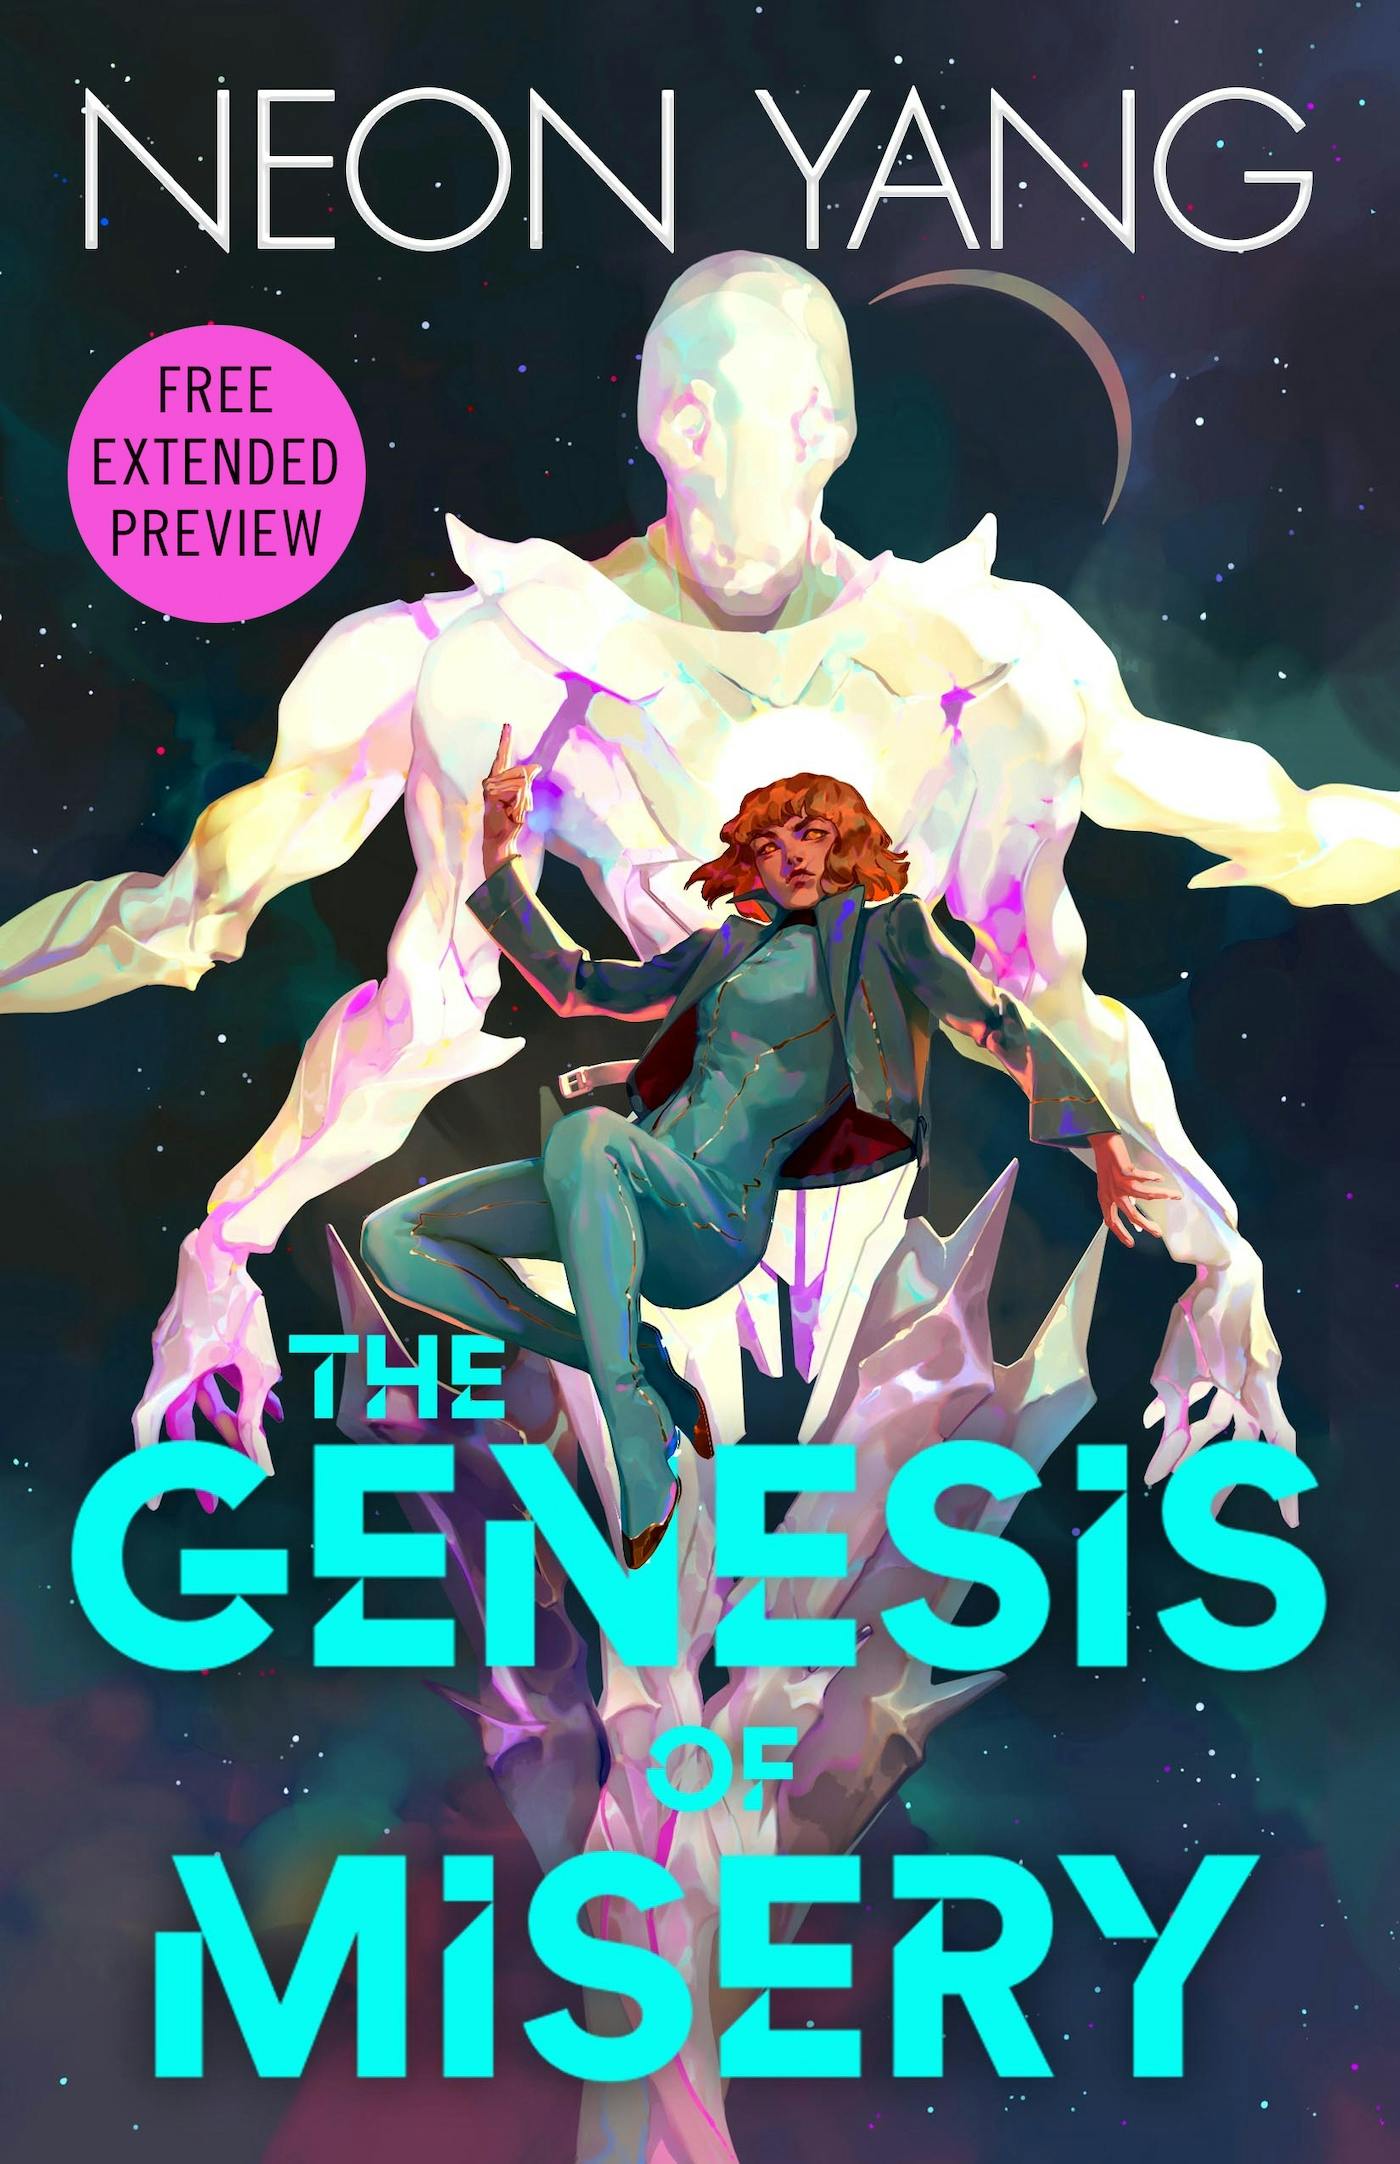 Cover for the book titled as: The Genesis of Misery Sneak Peek